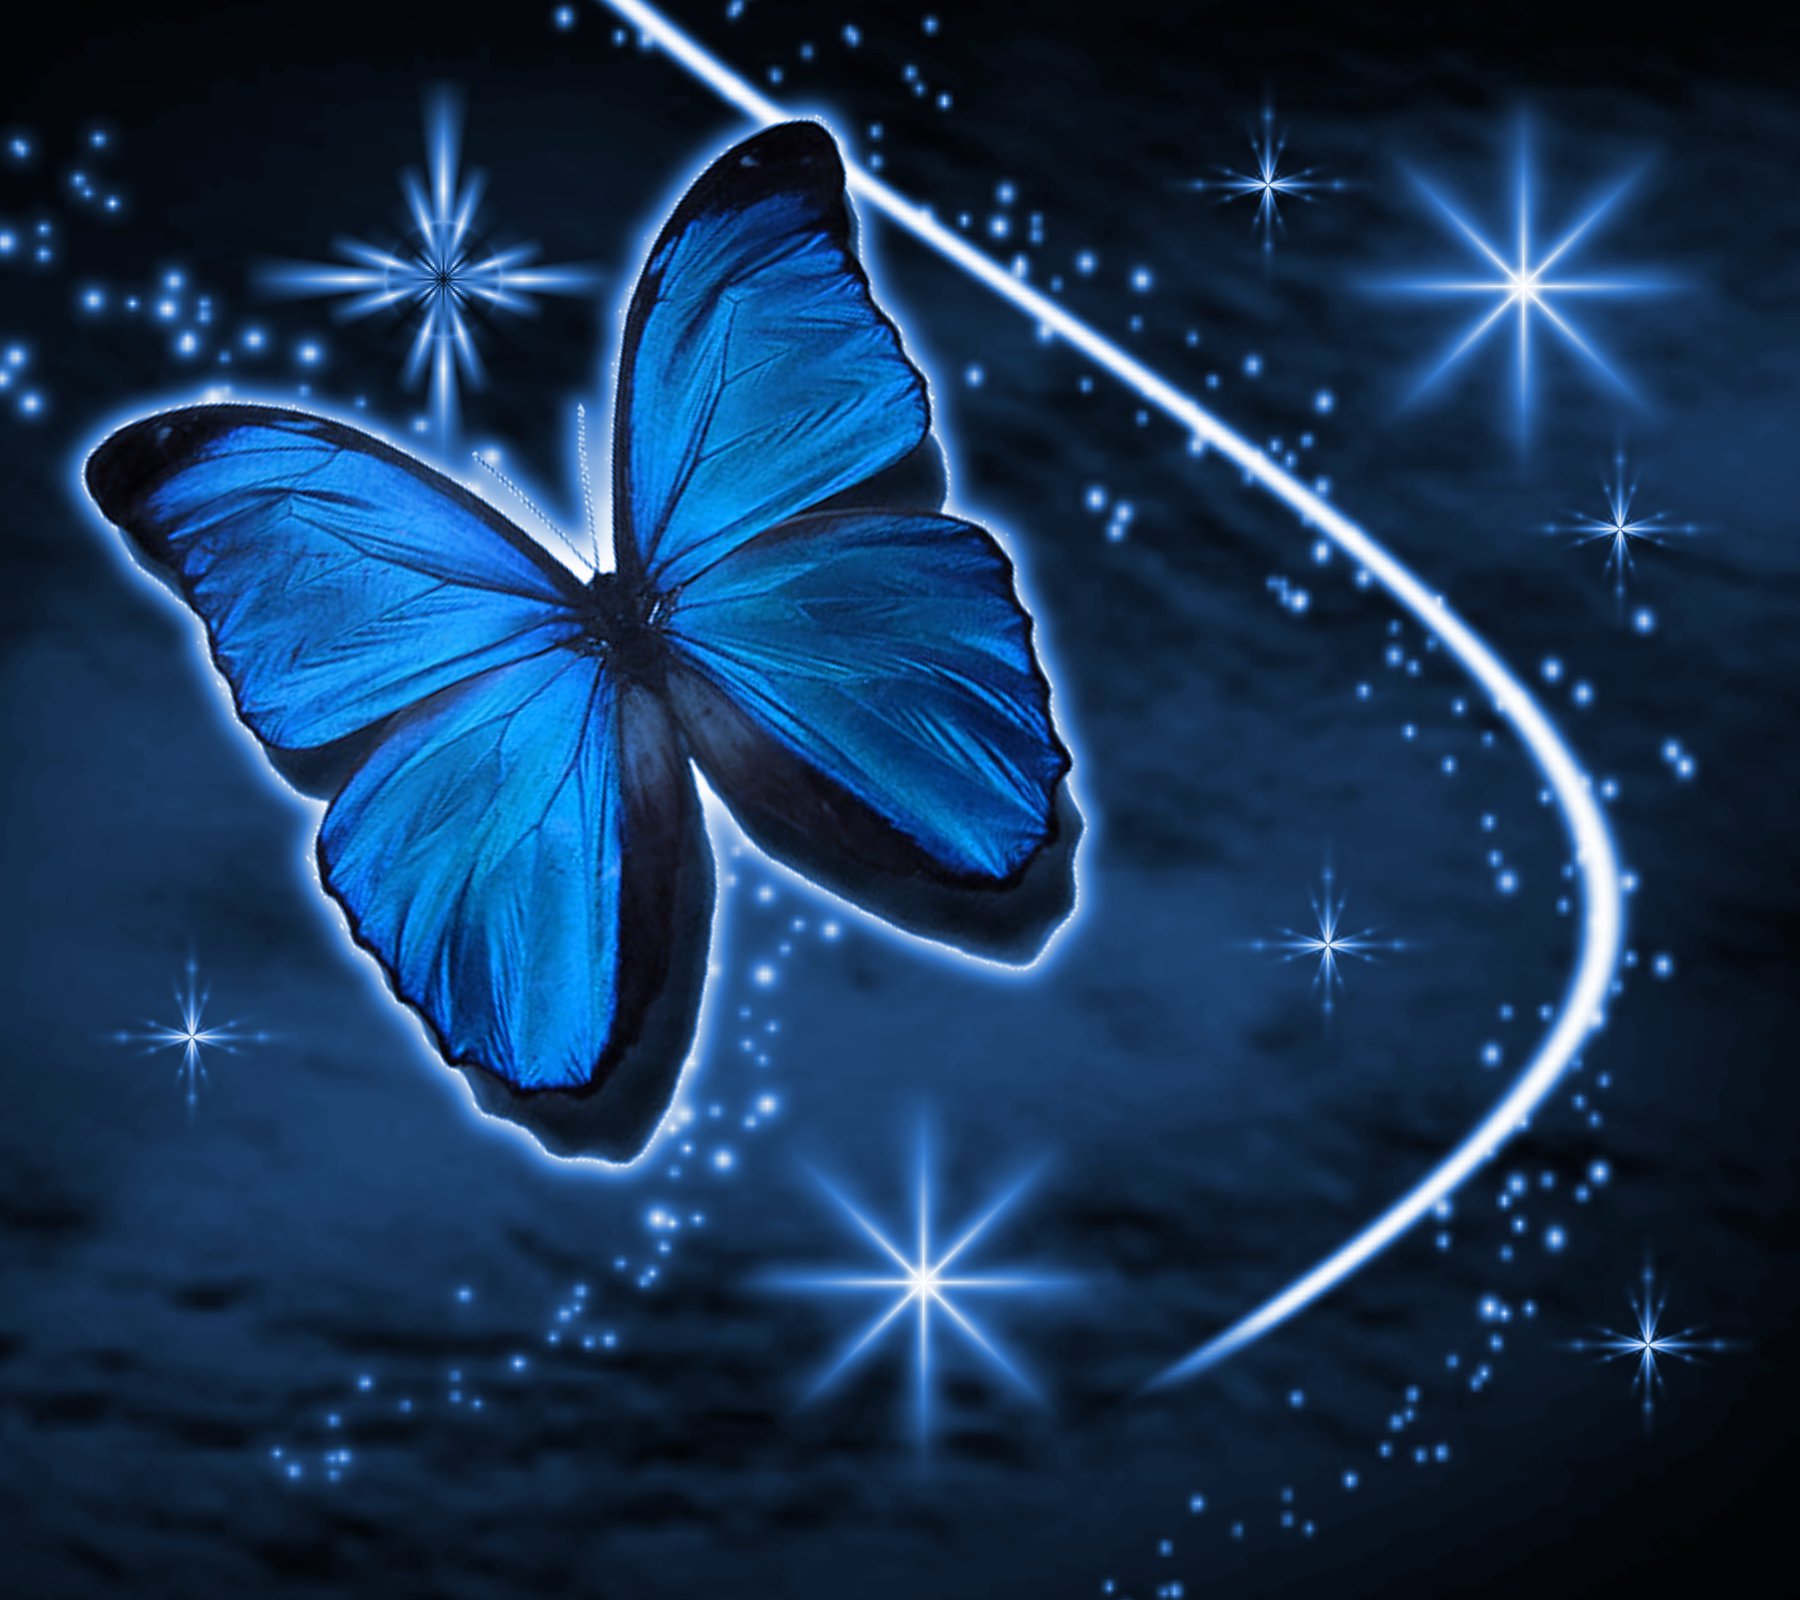 Blue Butterfly Background Image Amp Pictures Becuo